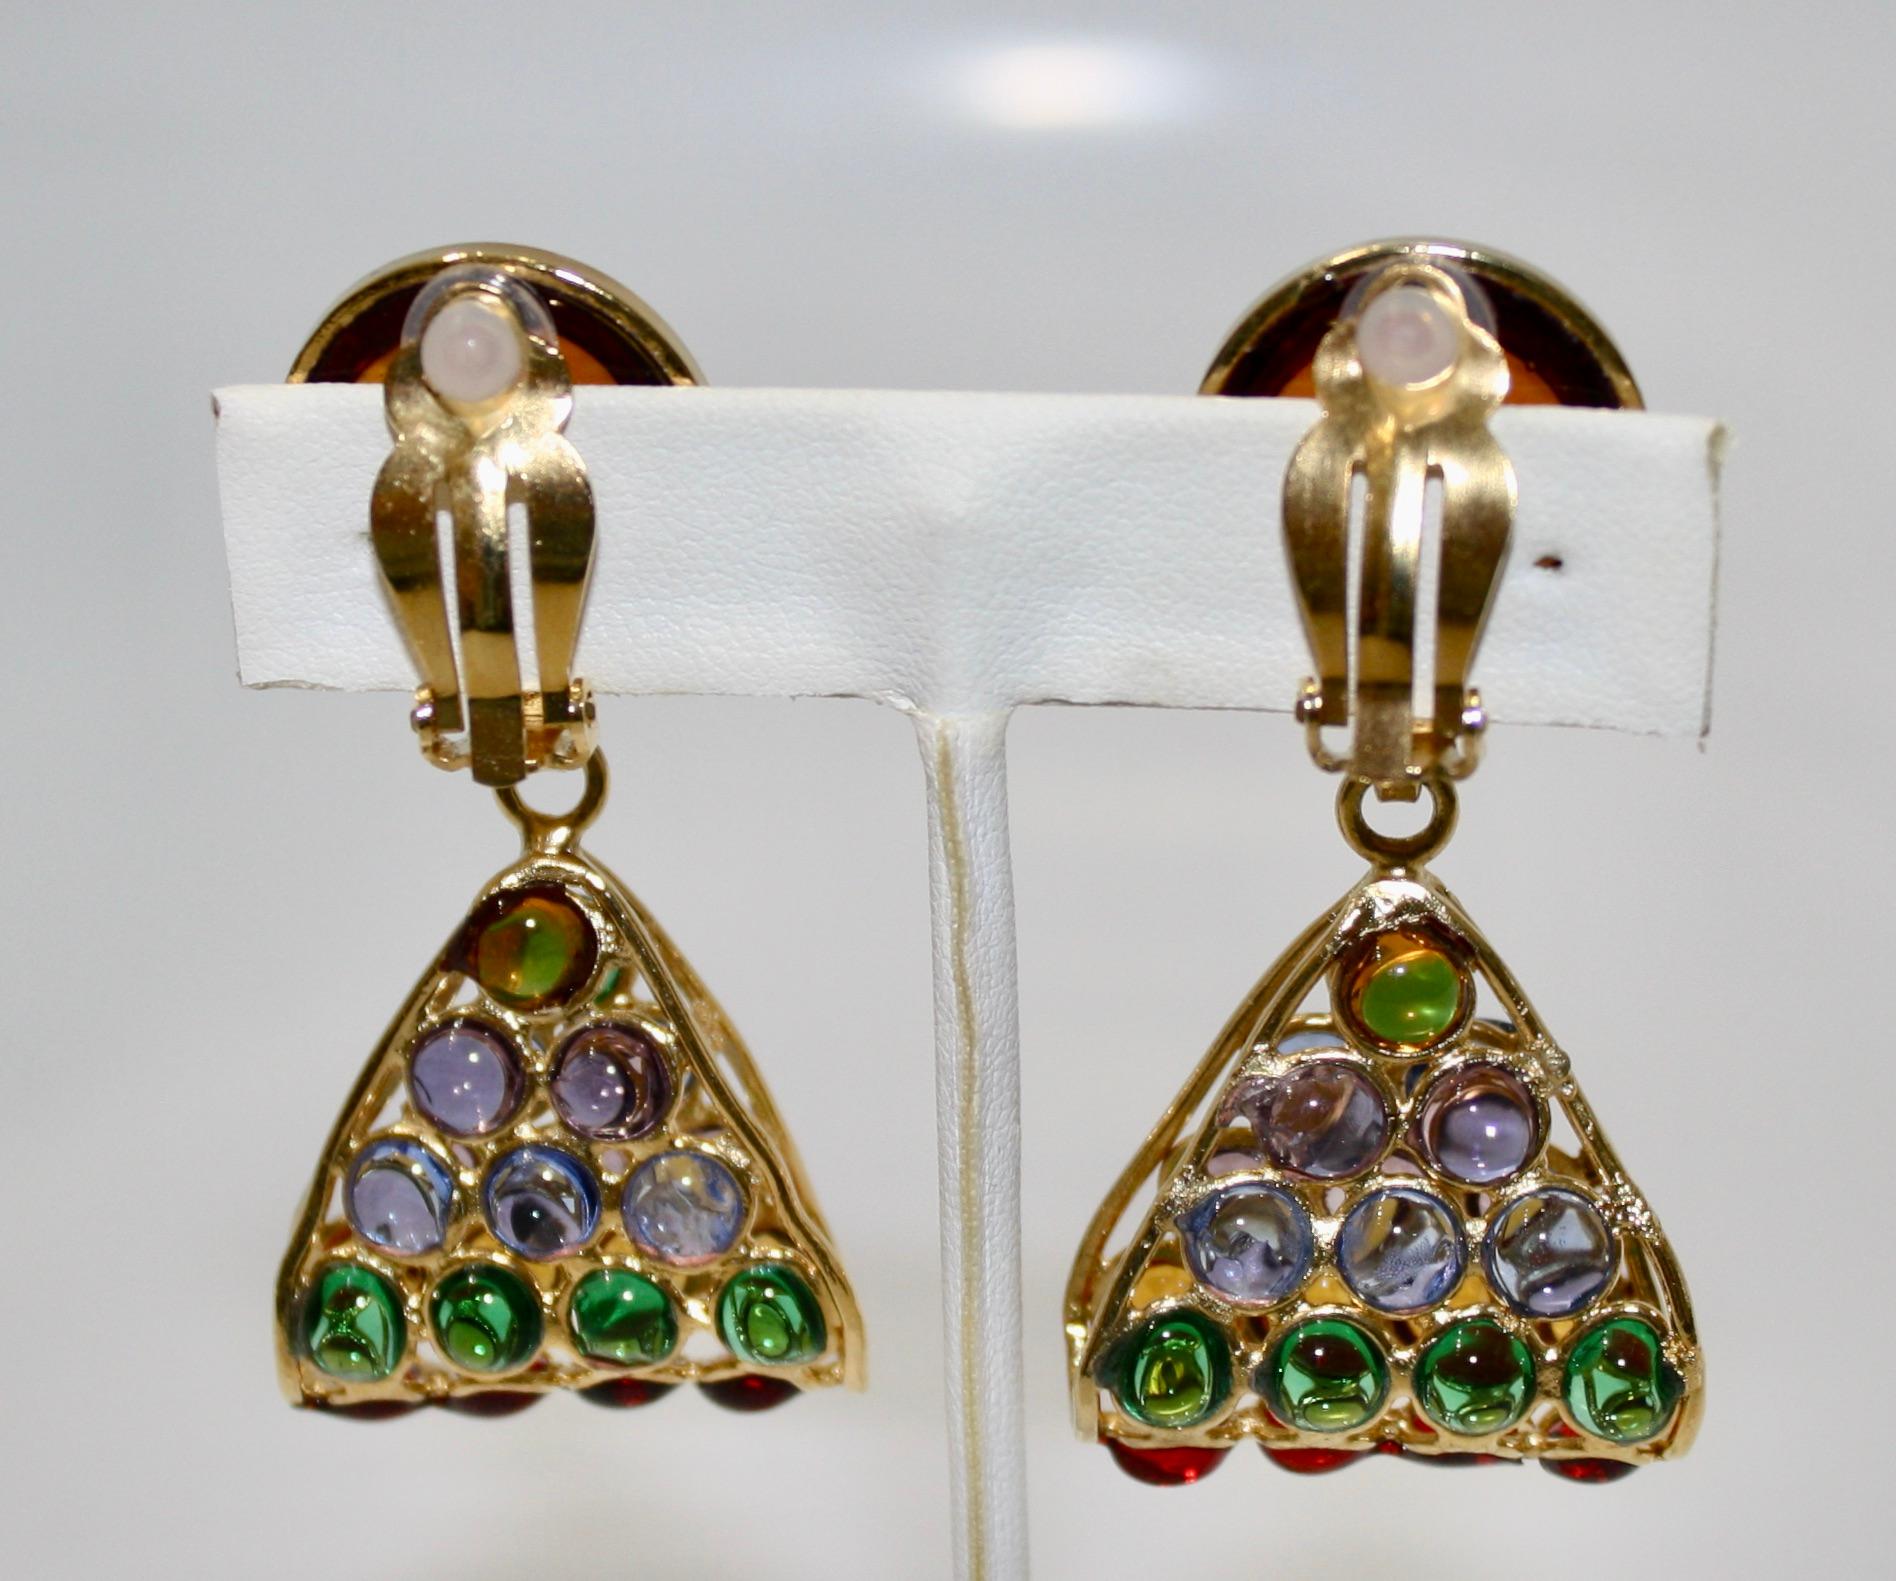 Made by the former artisans of the house of Gripoix in the poured glass process used in Chanel  costume jewelry..
Gilded brass with multicolor pate de verre drops .